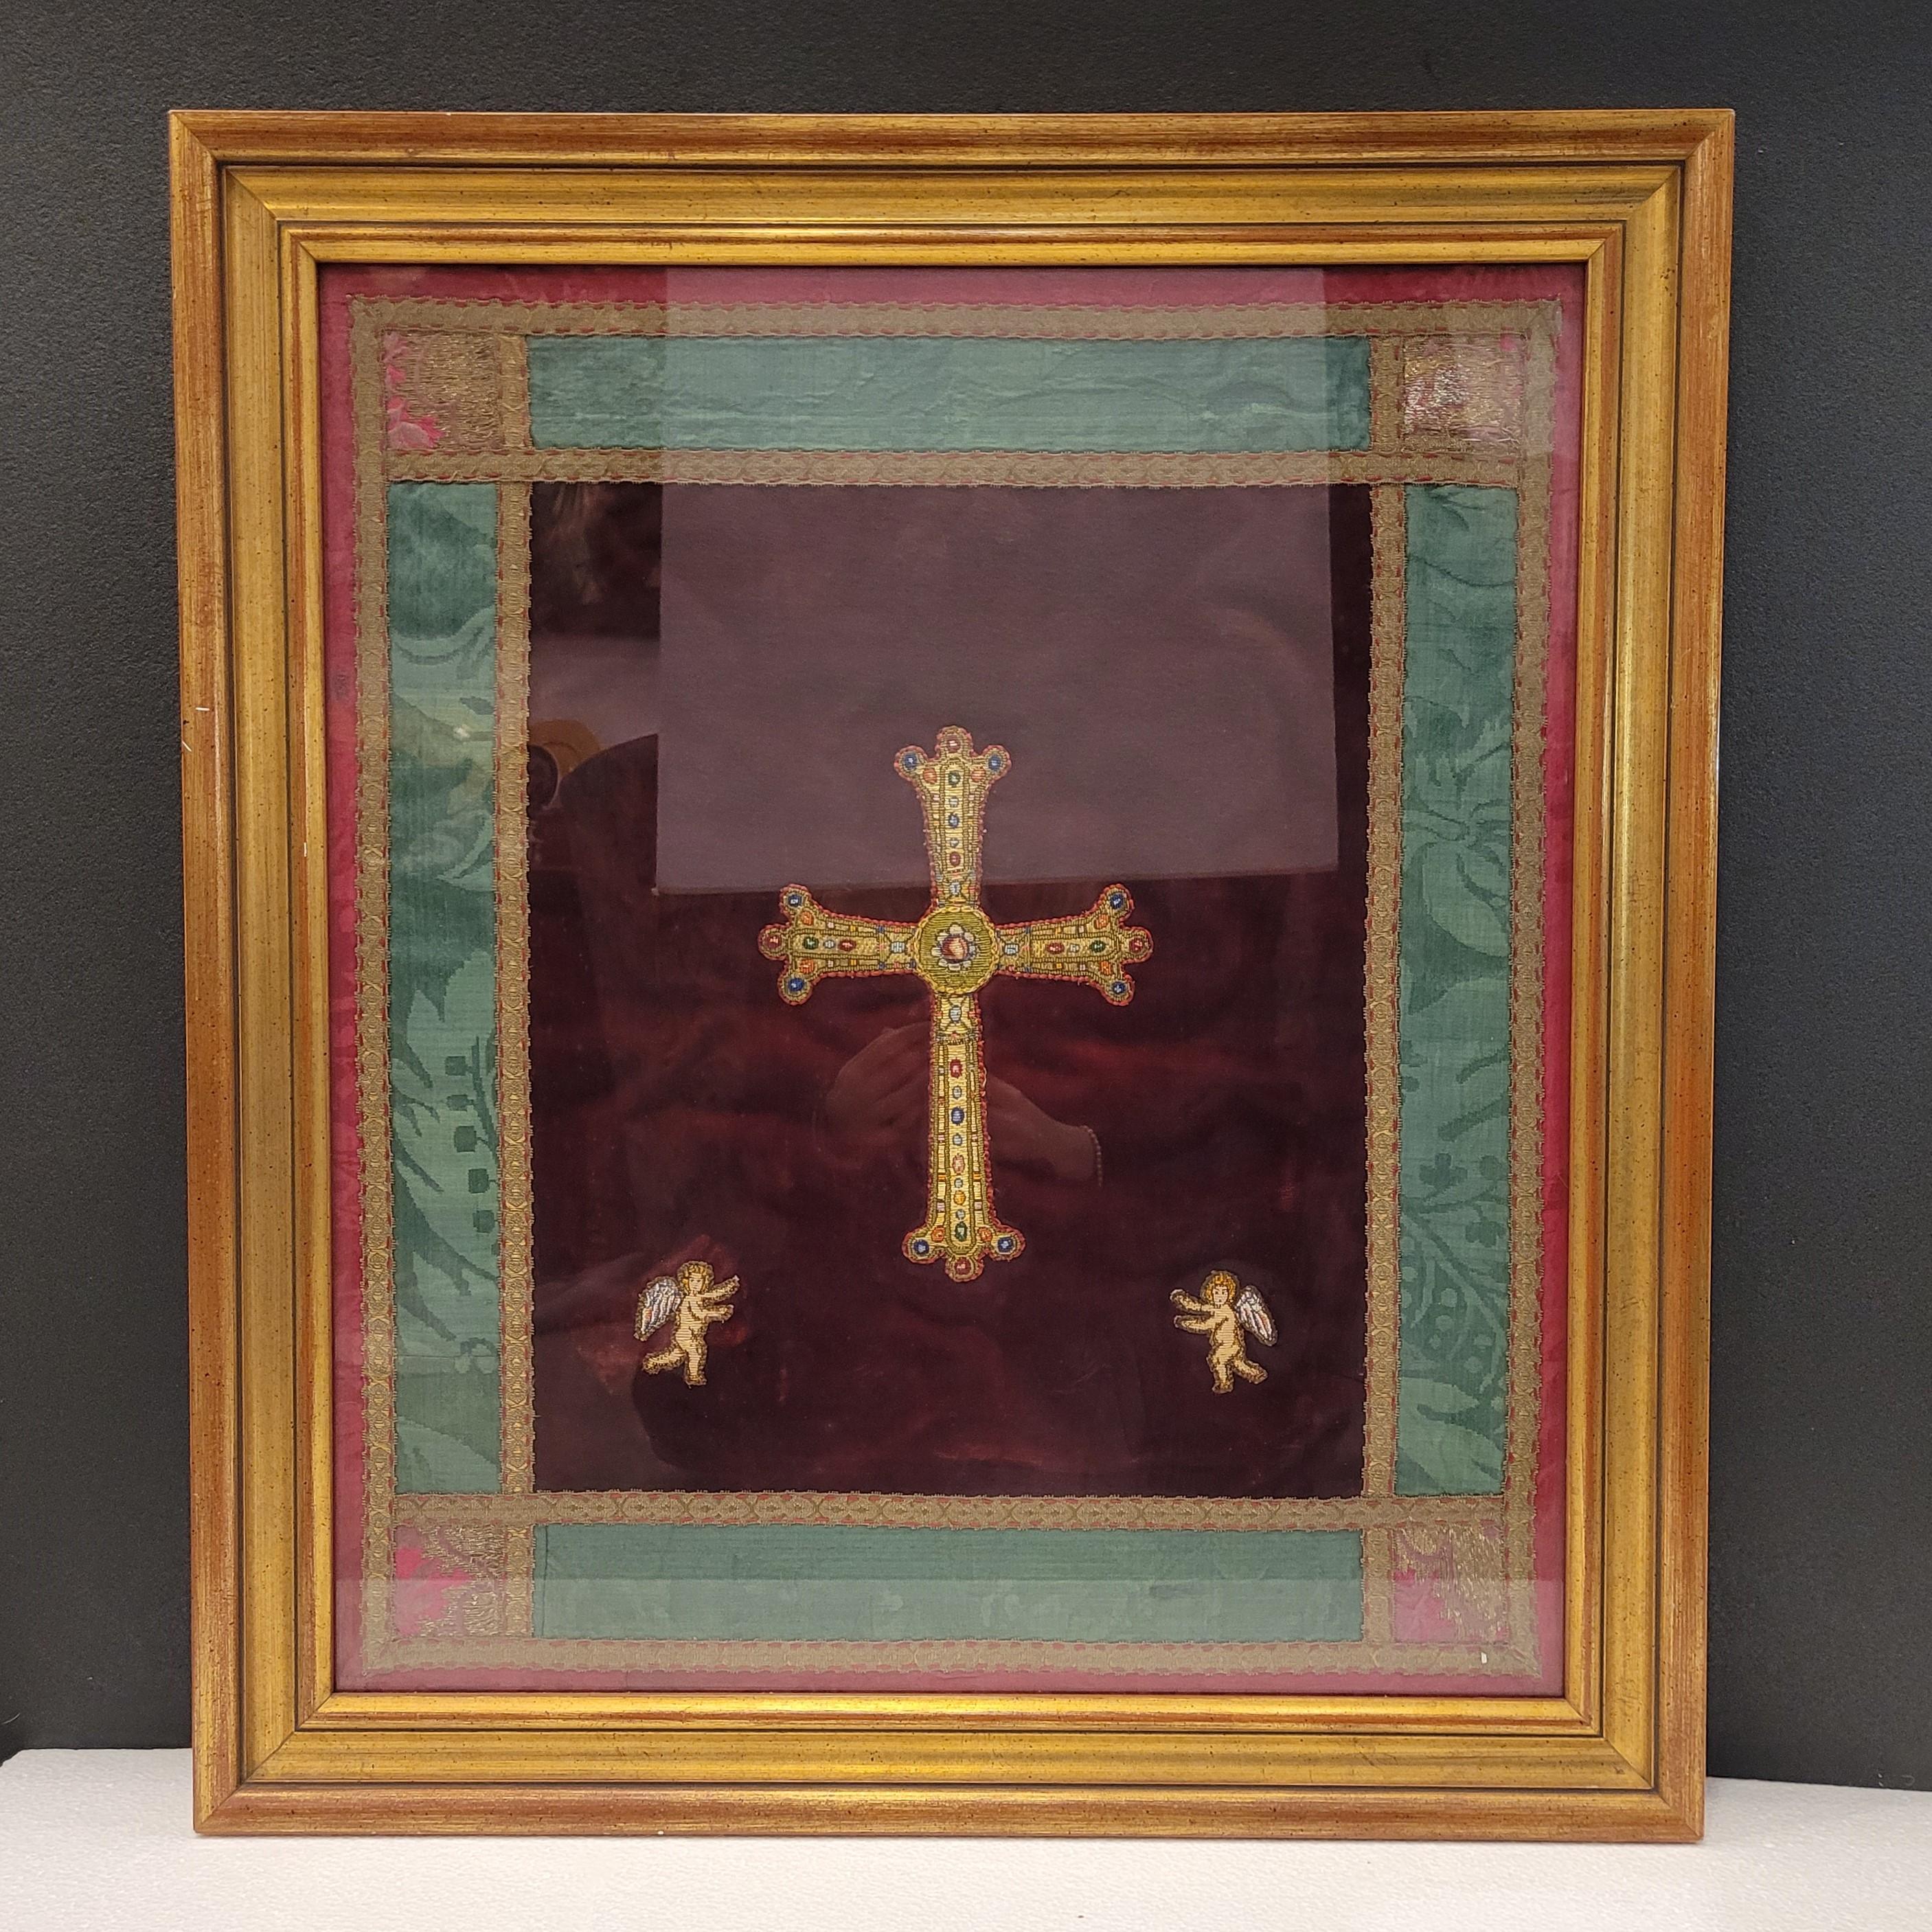 Gorgeous Victory cross embroidered on a parish priest's chasuble, with two angels also embroidered in the lower corners.

Victory Cross embroidered on velvet fabric, framed in a silk frame embroidered with damasks, with two angels at the bottom. The